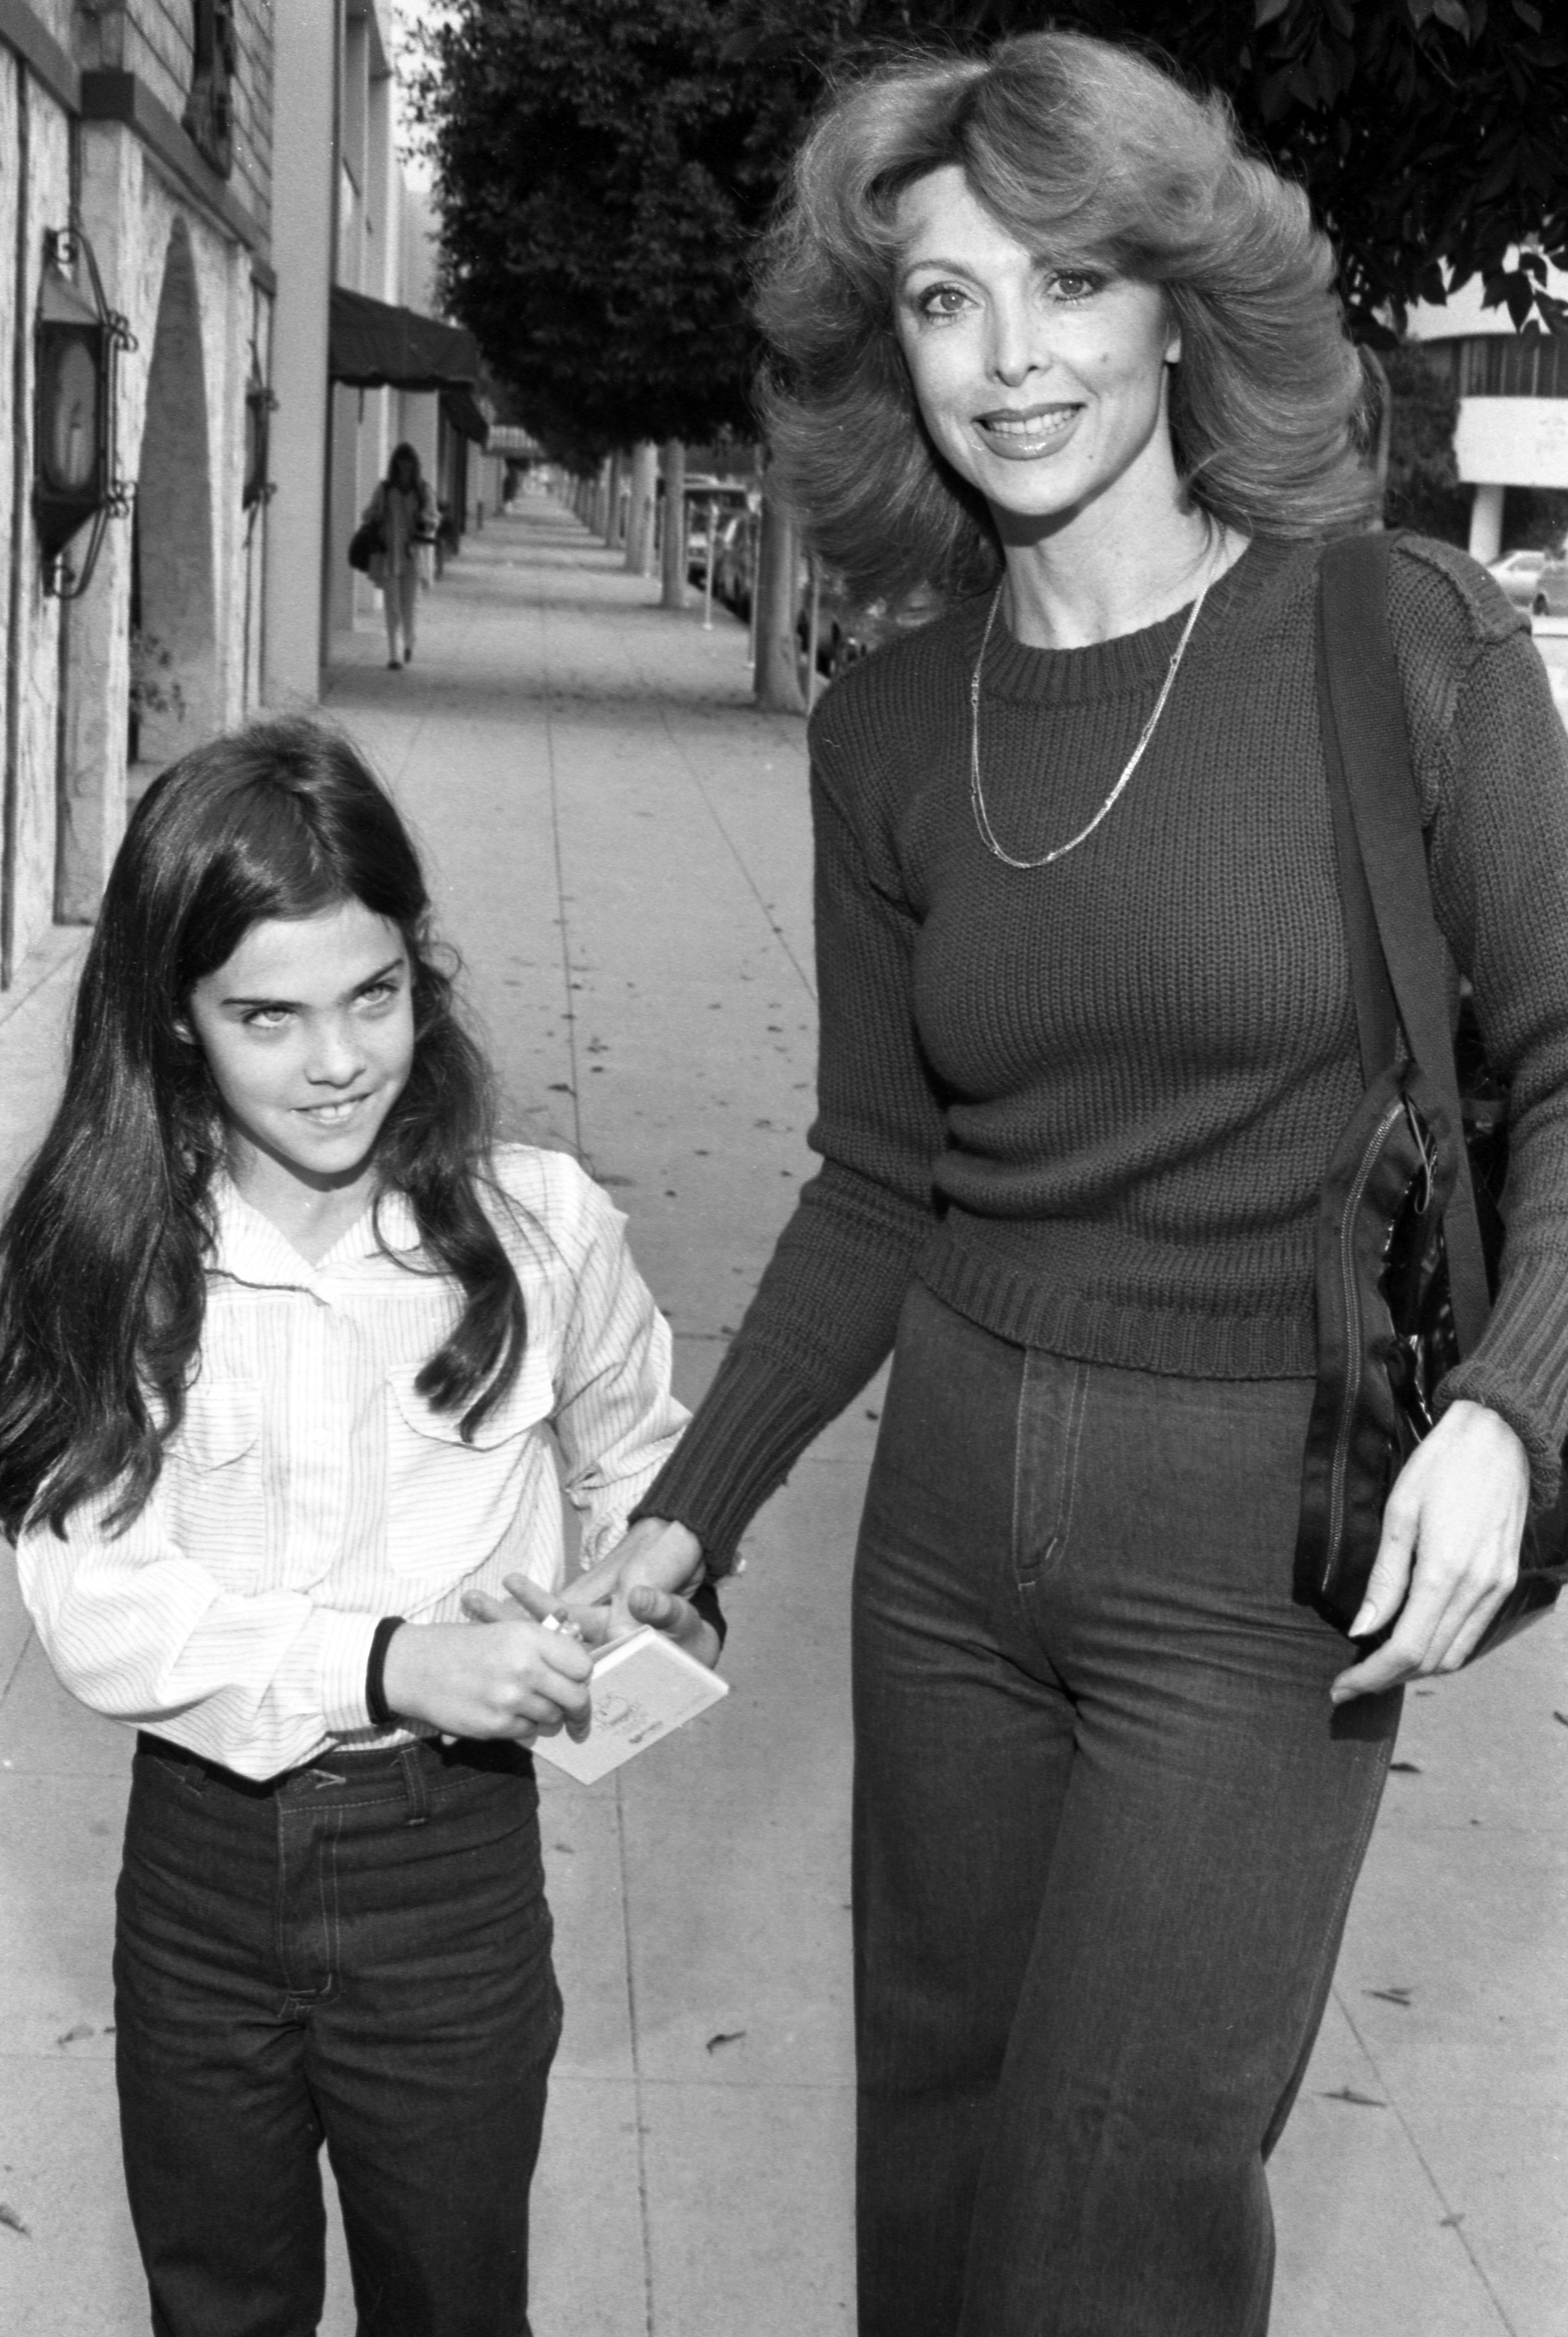 Caprice Crane and Tina Louise pictured on February 4, 1980 | Sources: Getty Images